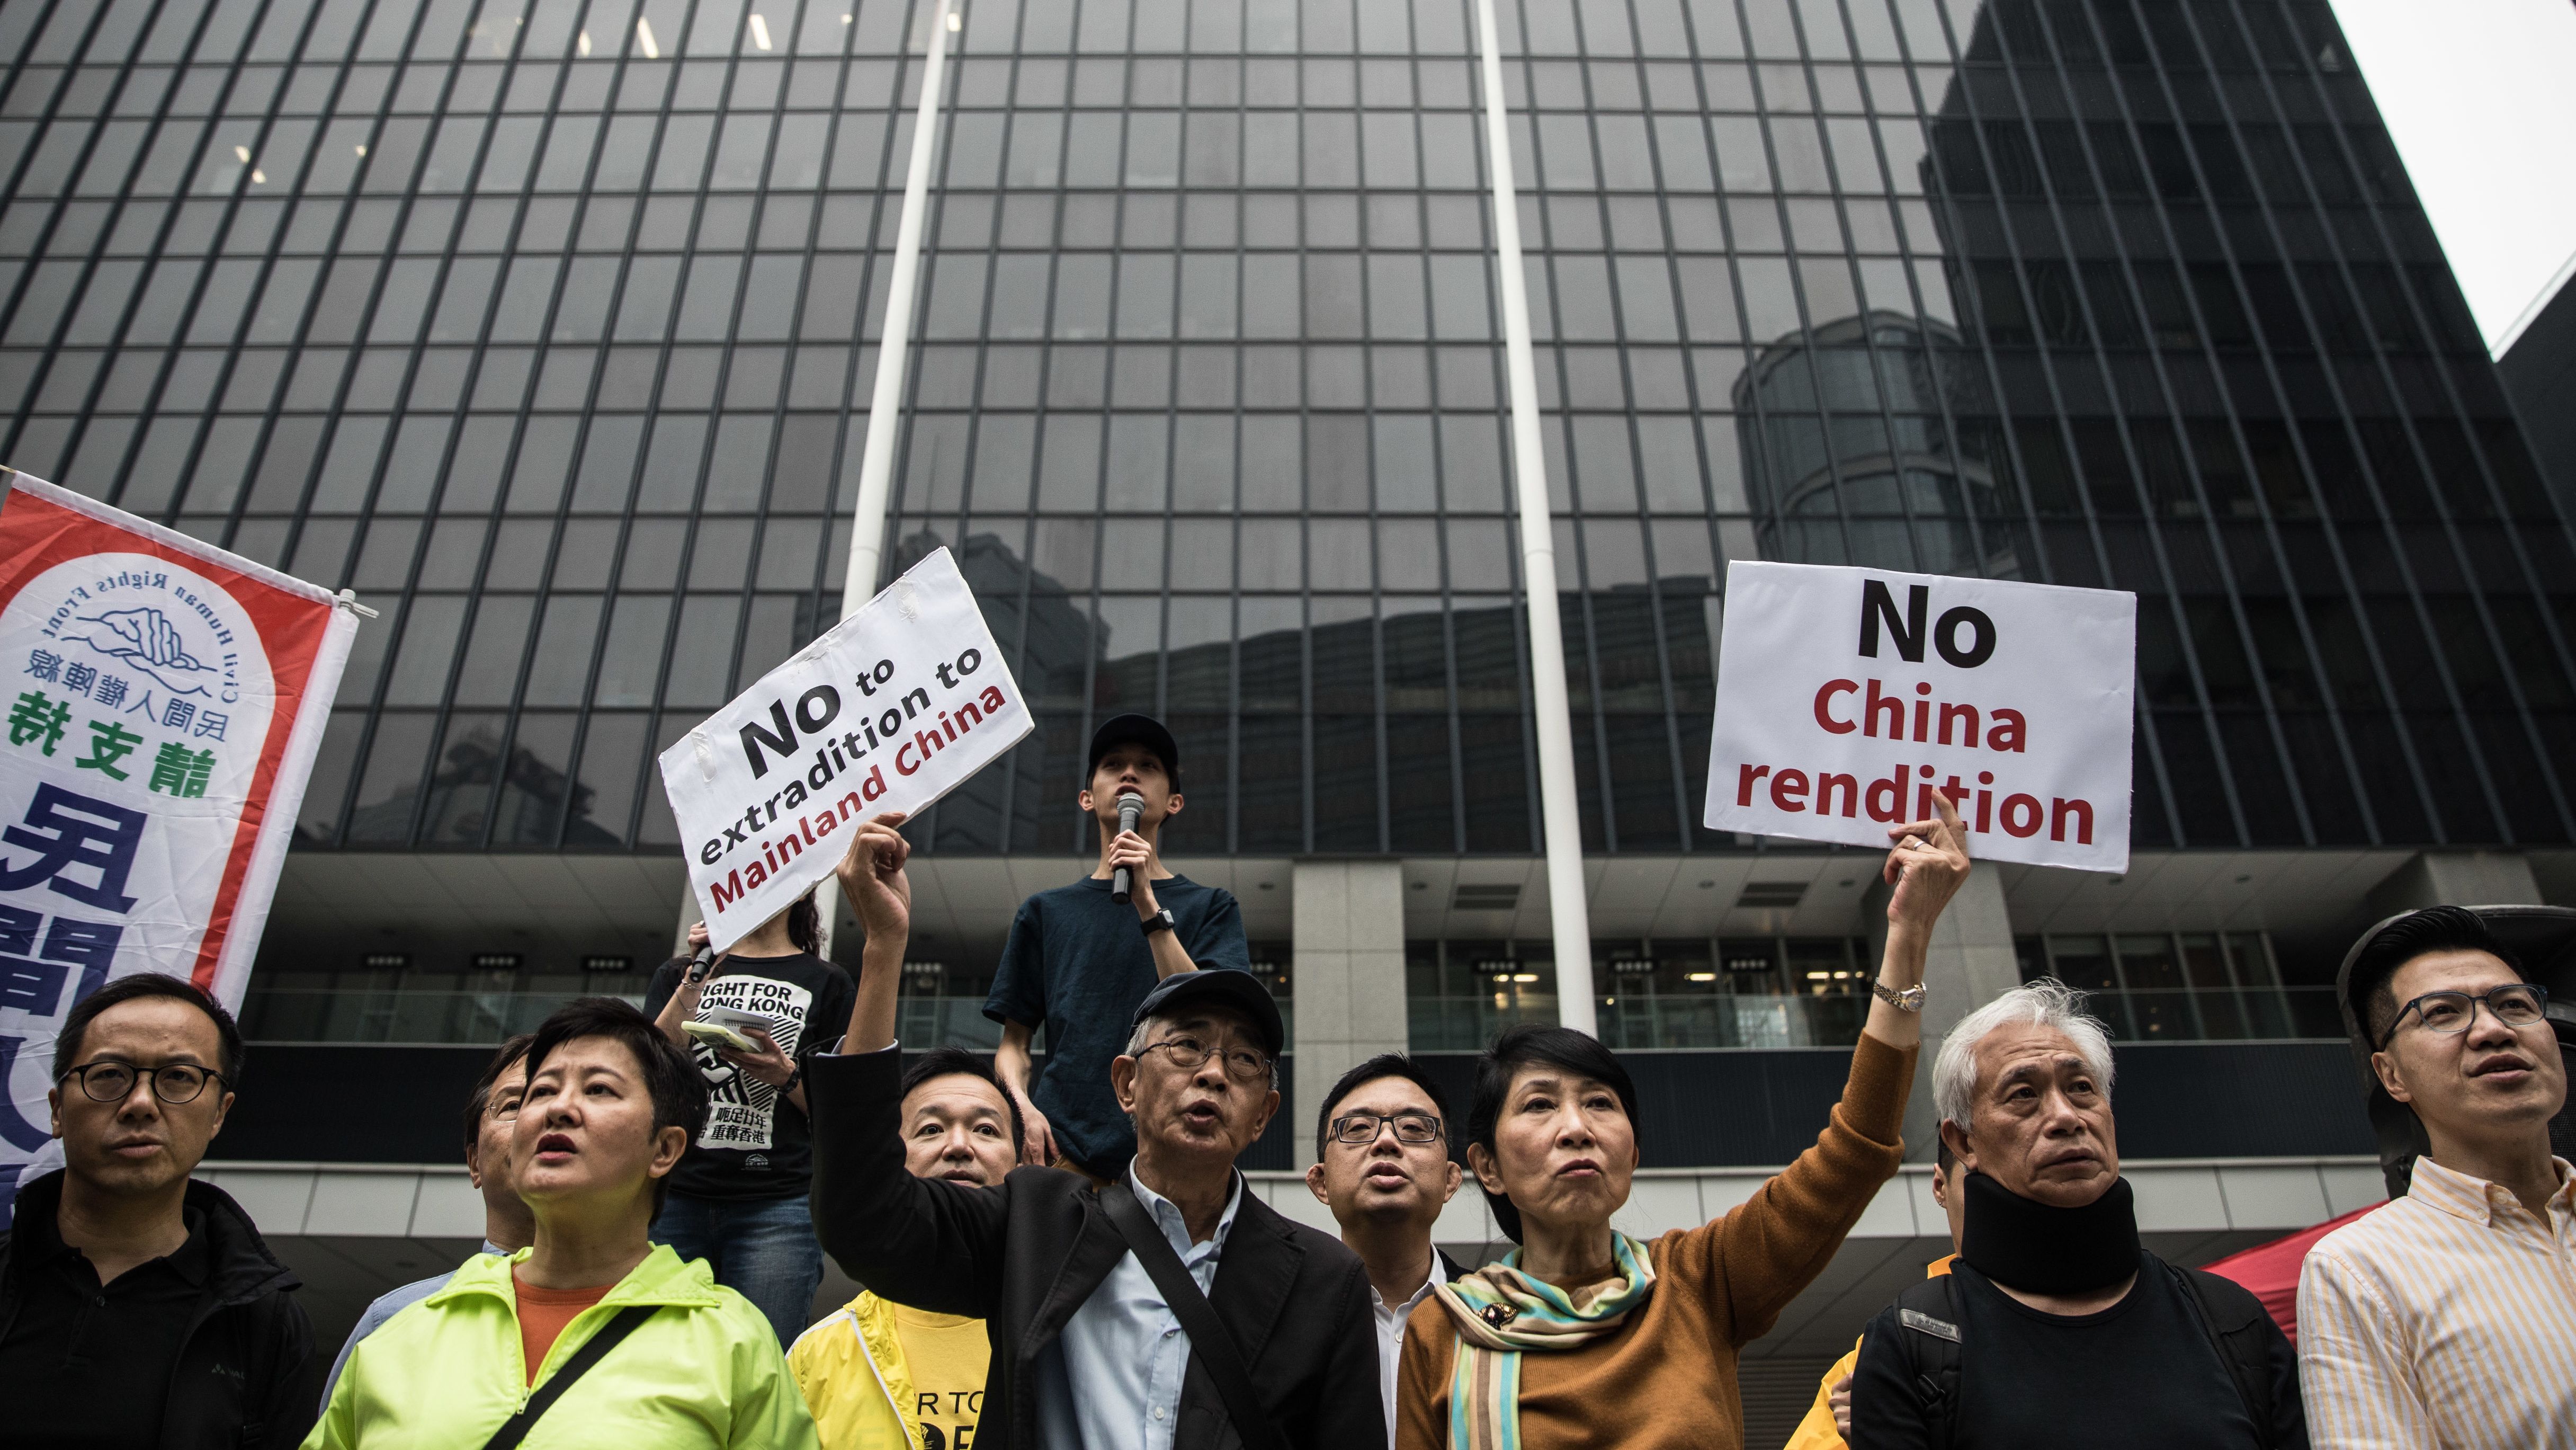 Hong Kong pro-democracy legislator Claudia Mo (center right) and bookseller Lam Wing-kee (center left) protest the government's plans to approve an extradition deal with mainland China.